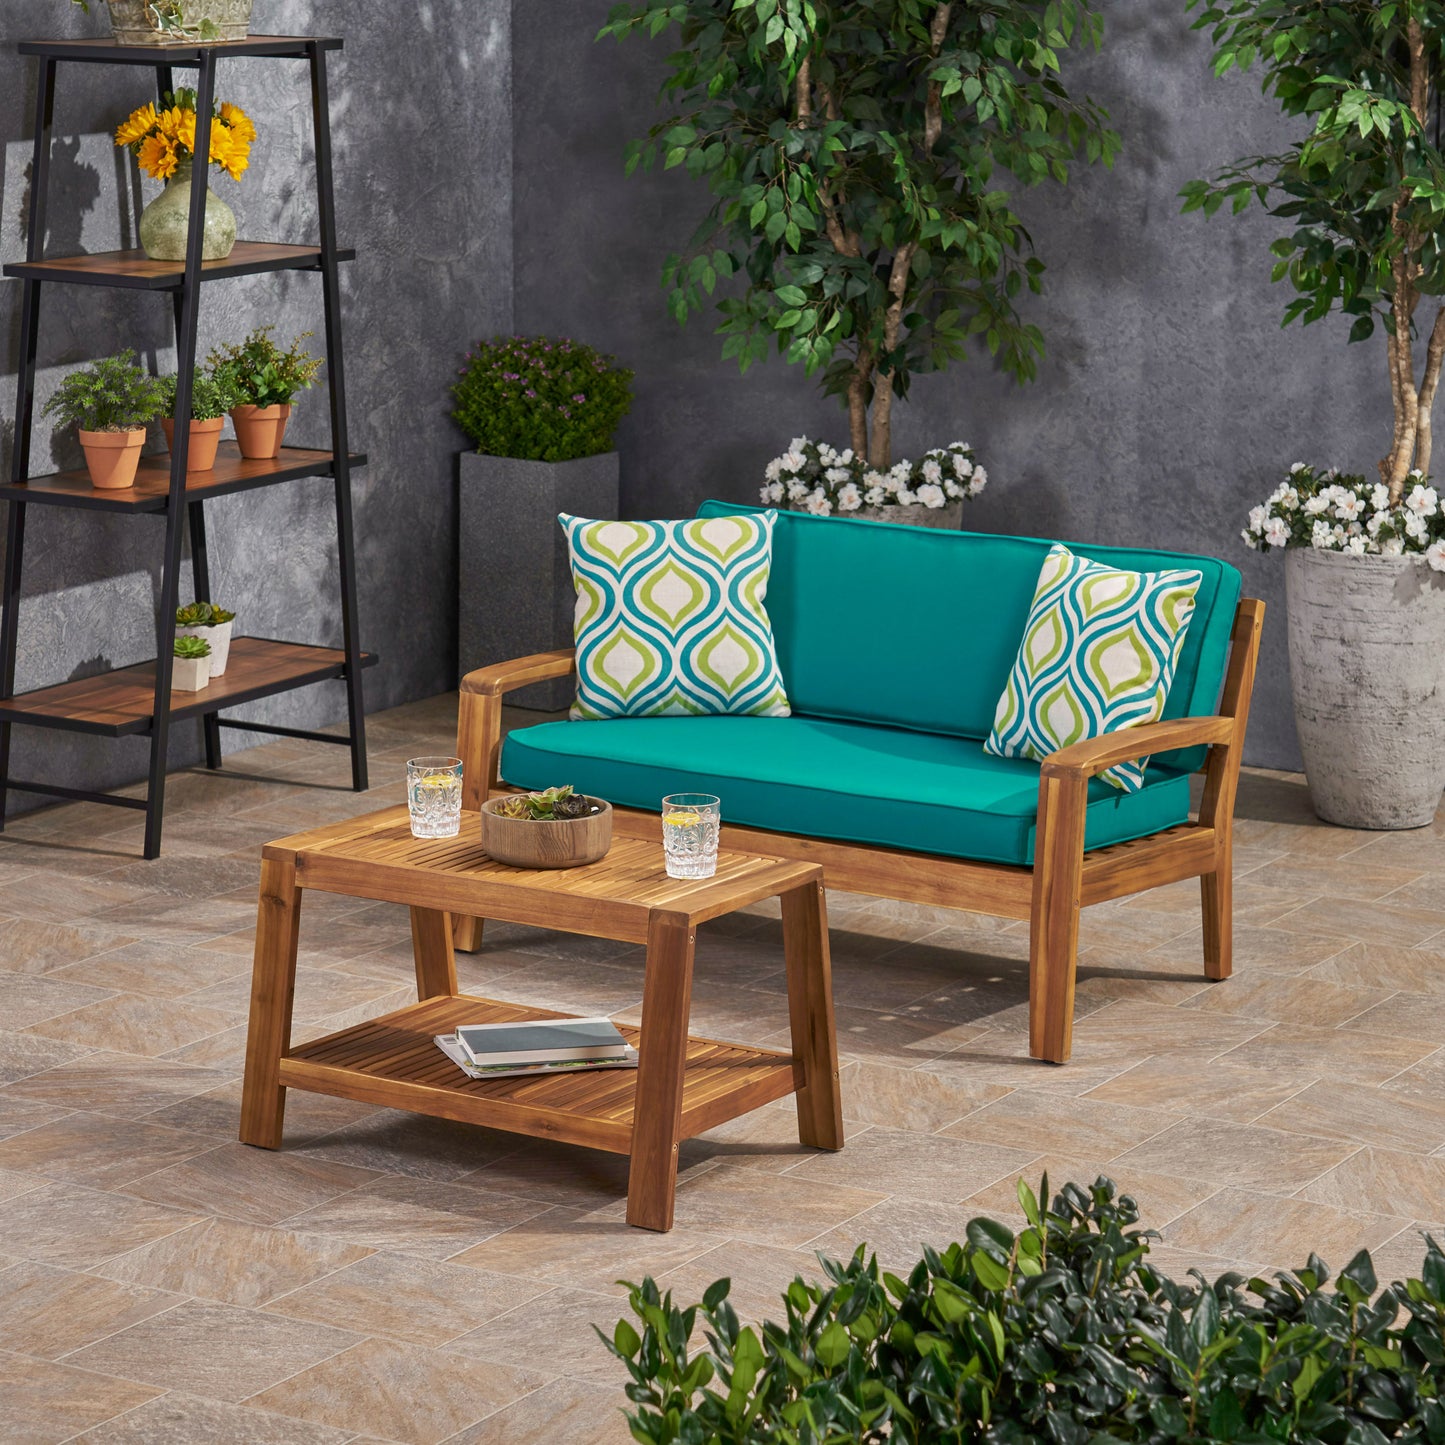 Parma Outdoor Acacia Wood Loveseat and Coffee Table Set with Sunbrella Cushions